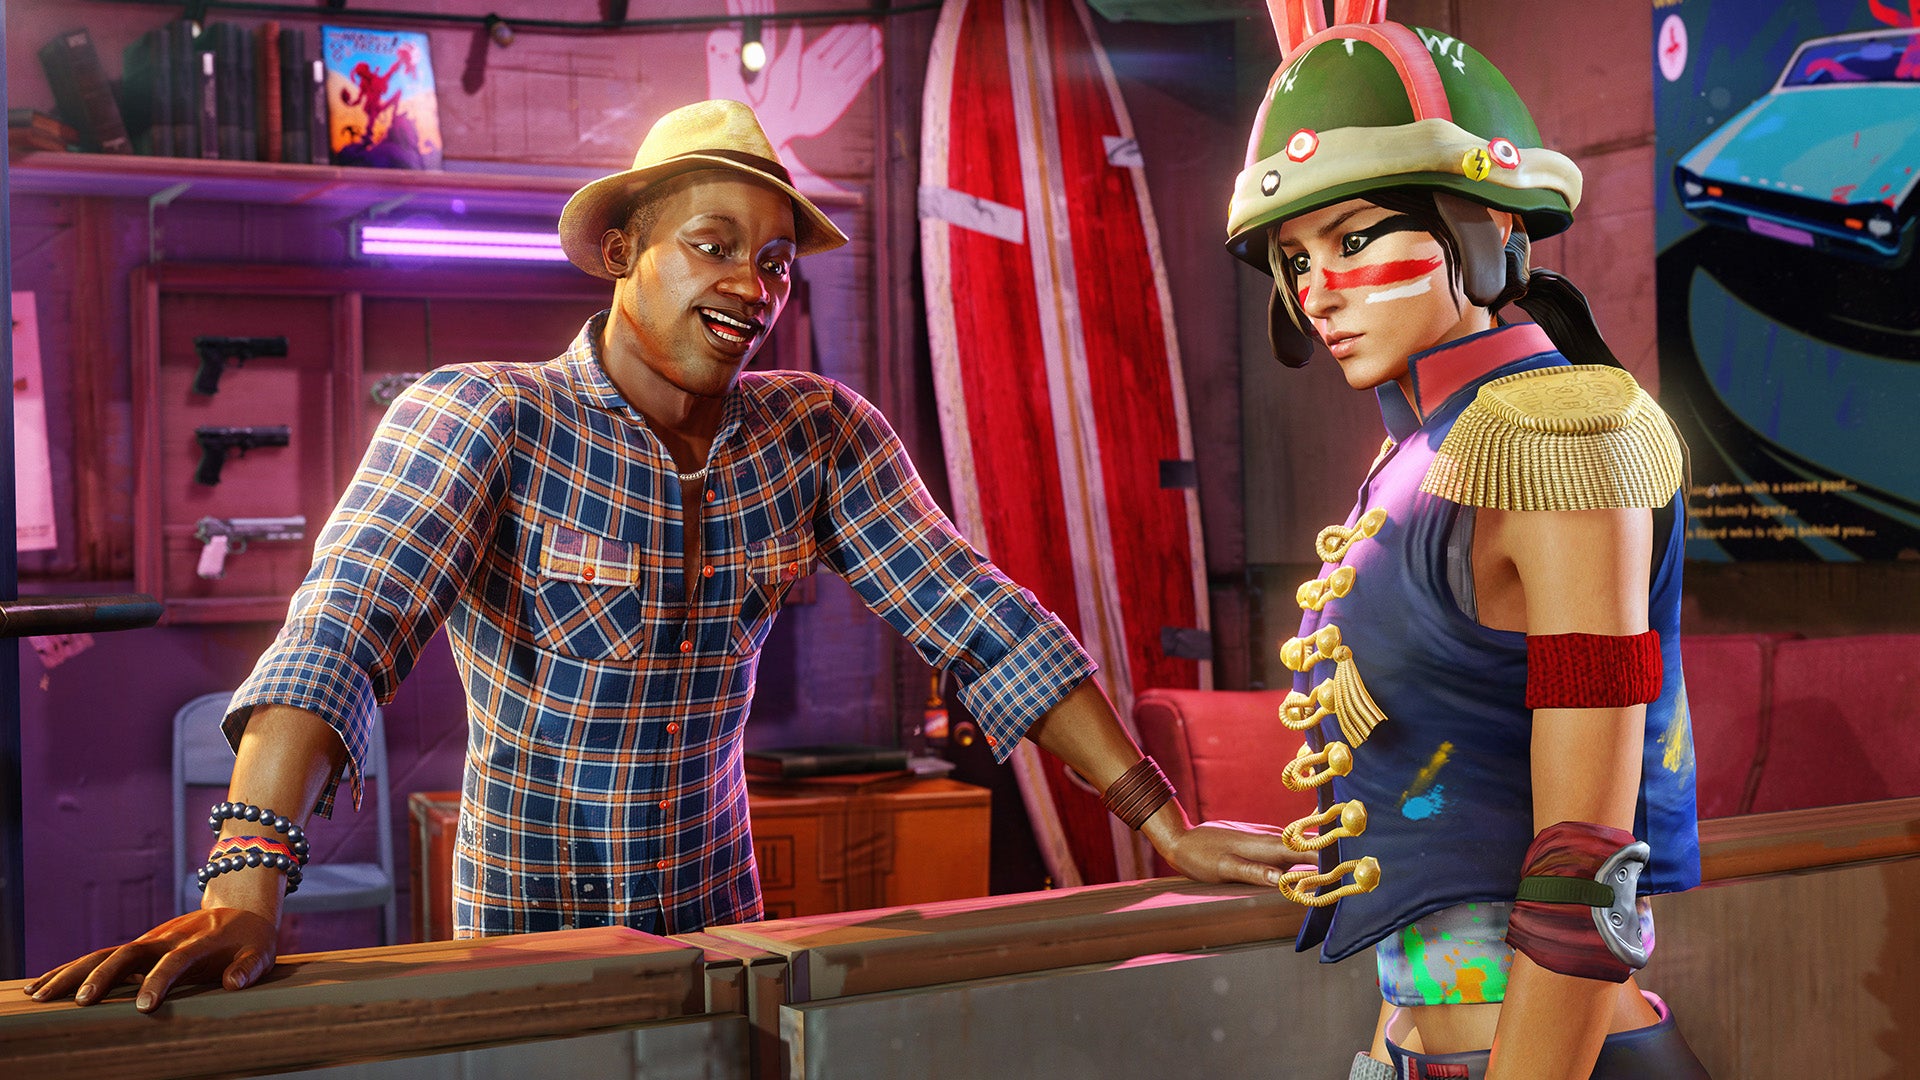 Image for Xbox deals: Sunset Overdrive, FIFA, NHL, UFC, more 